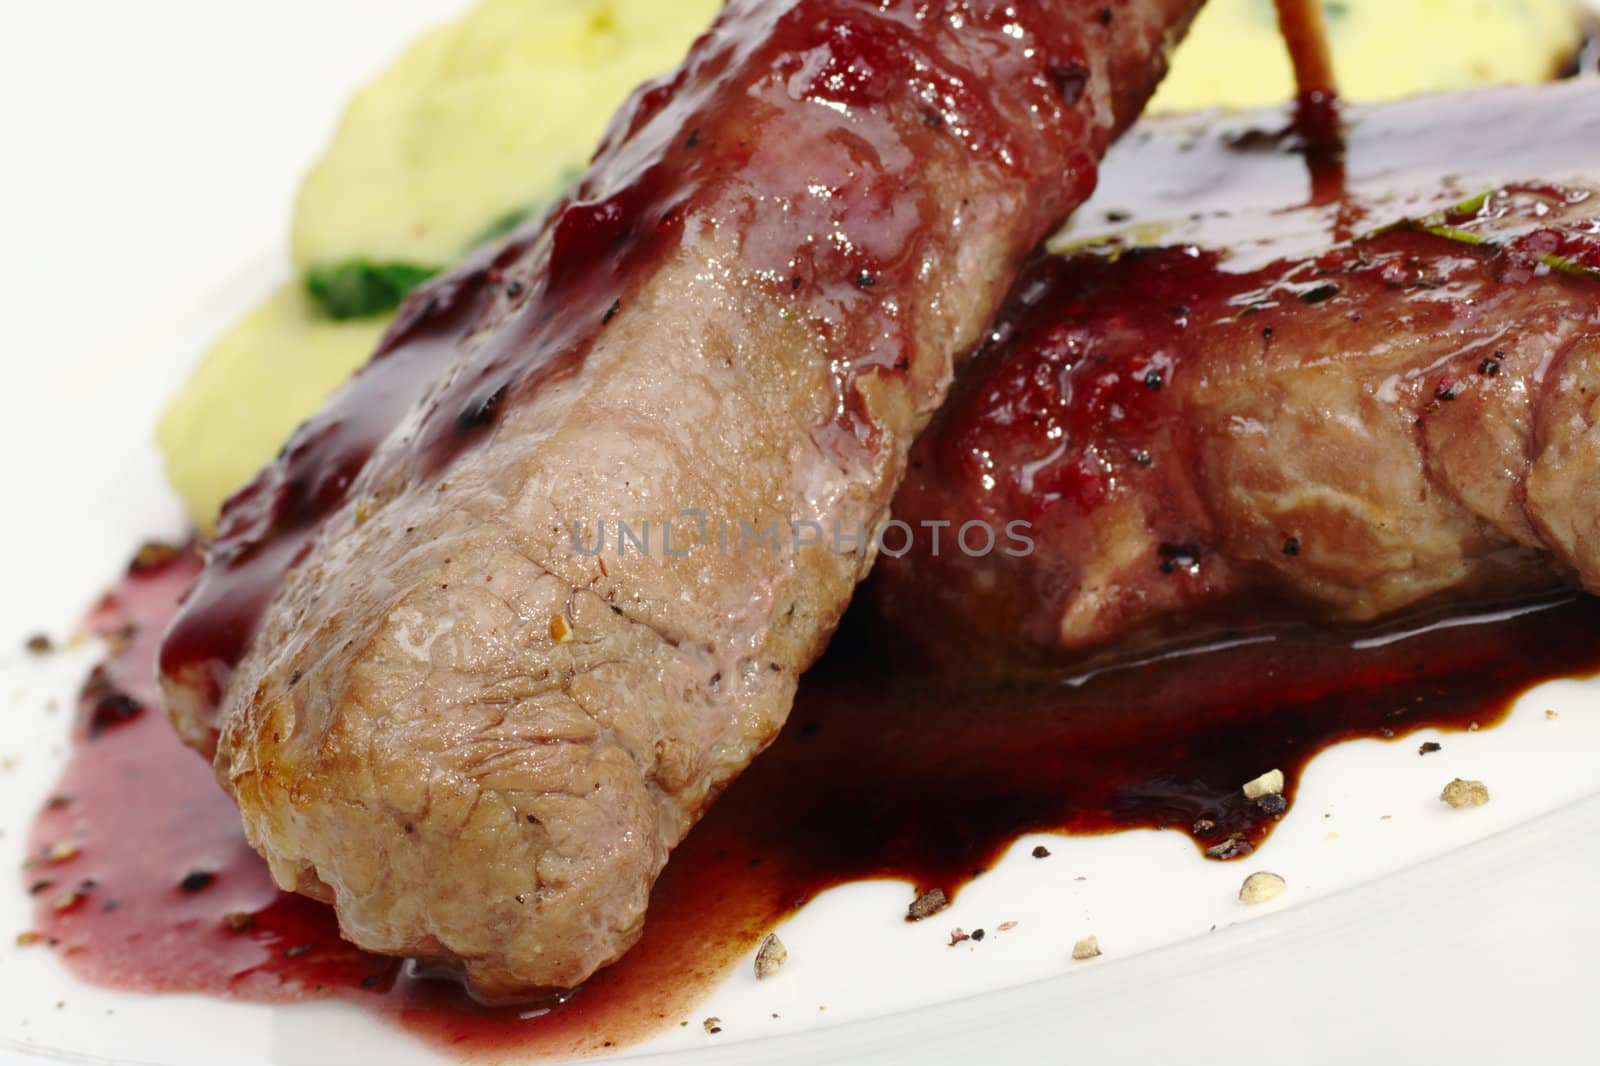 Main dish: Meat with red pepper sauce and mashed potato in the back (Selective Focus, Focus on the front of the left meat)